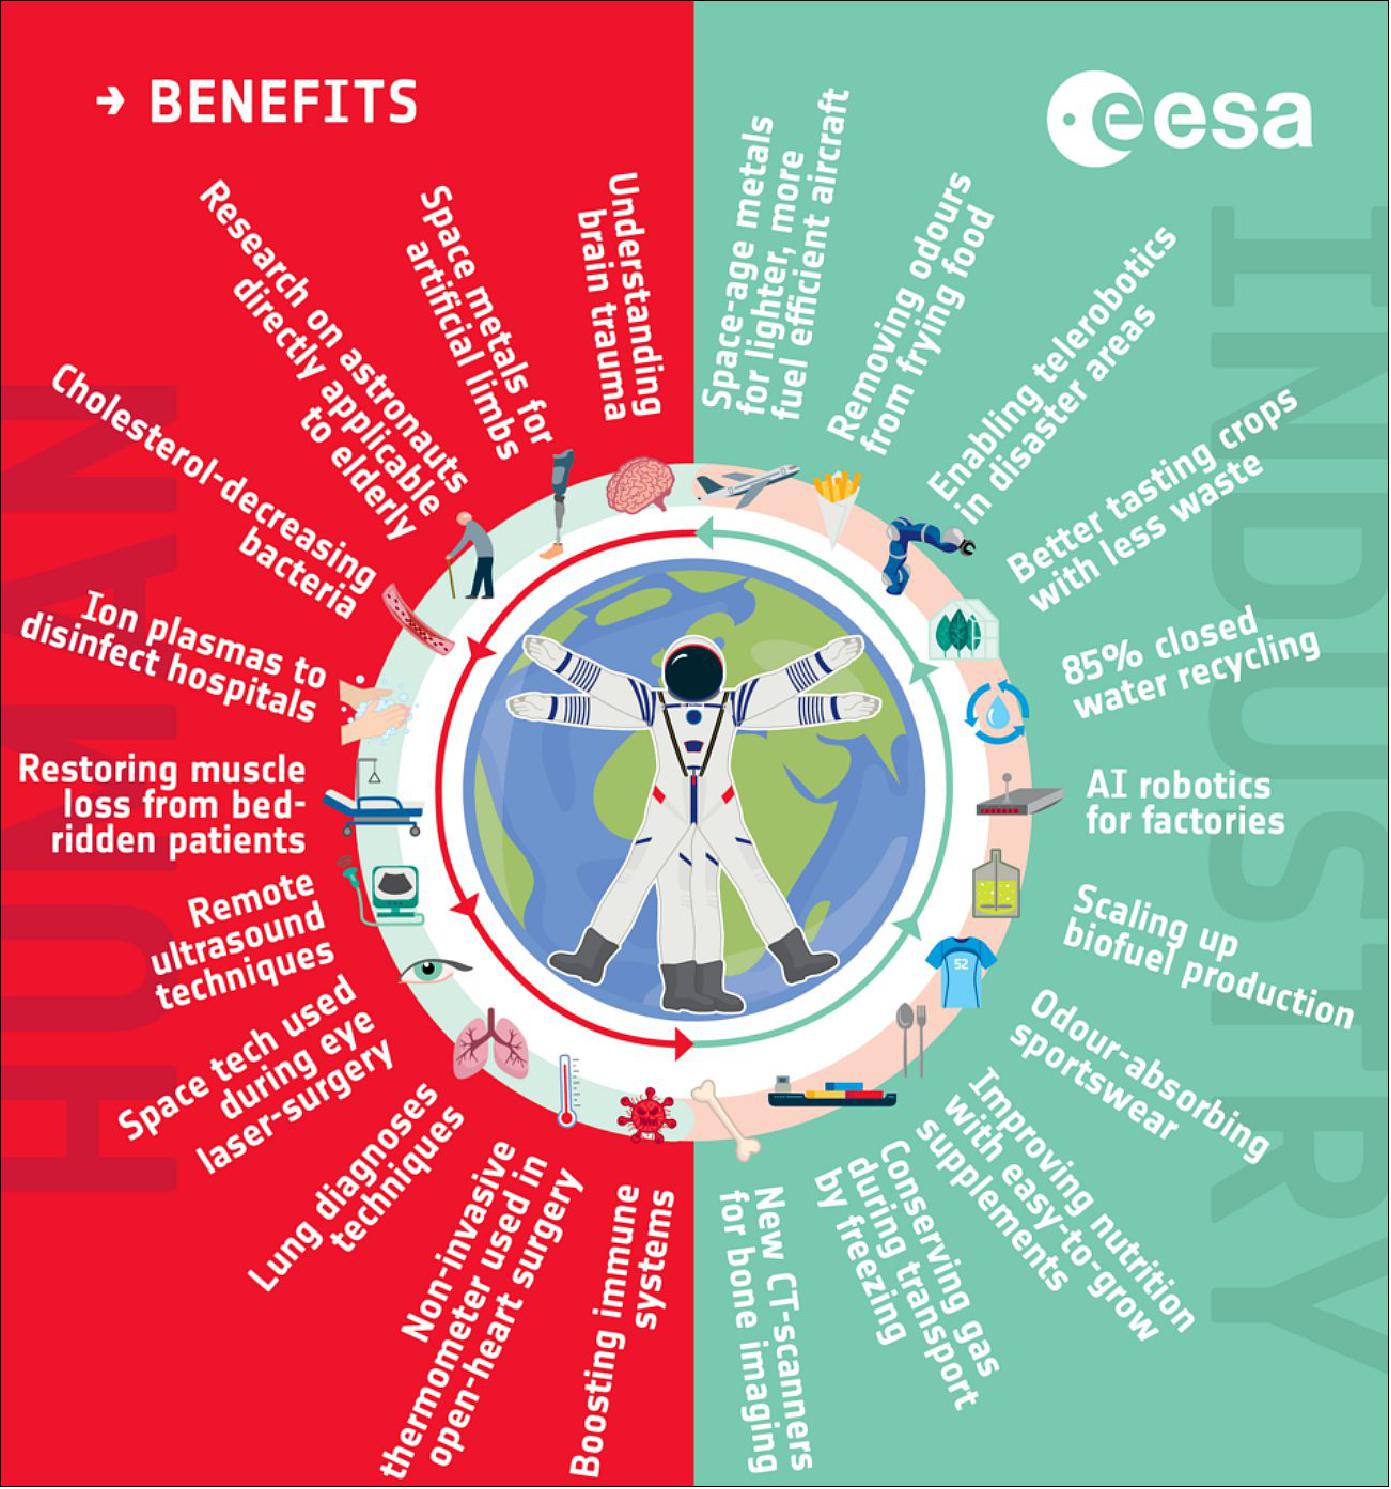 Figure 11: Human and robotic exploration benefits infographic. Human and robotic spaceflight, due to its nature of supporting astronauts in space, contributes to a circular economy by improving energy efficiency, automation, robotics and artificial intelligence as well as habitation, recycling, waste management and additive manufacturing (image credit: ESA, K. Oldenberg)